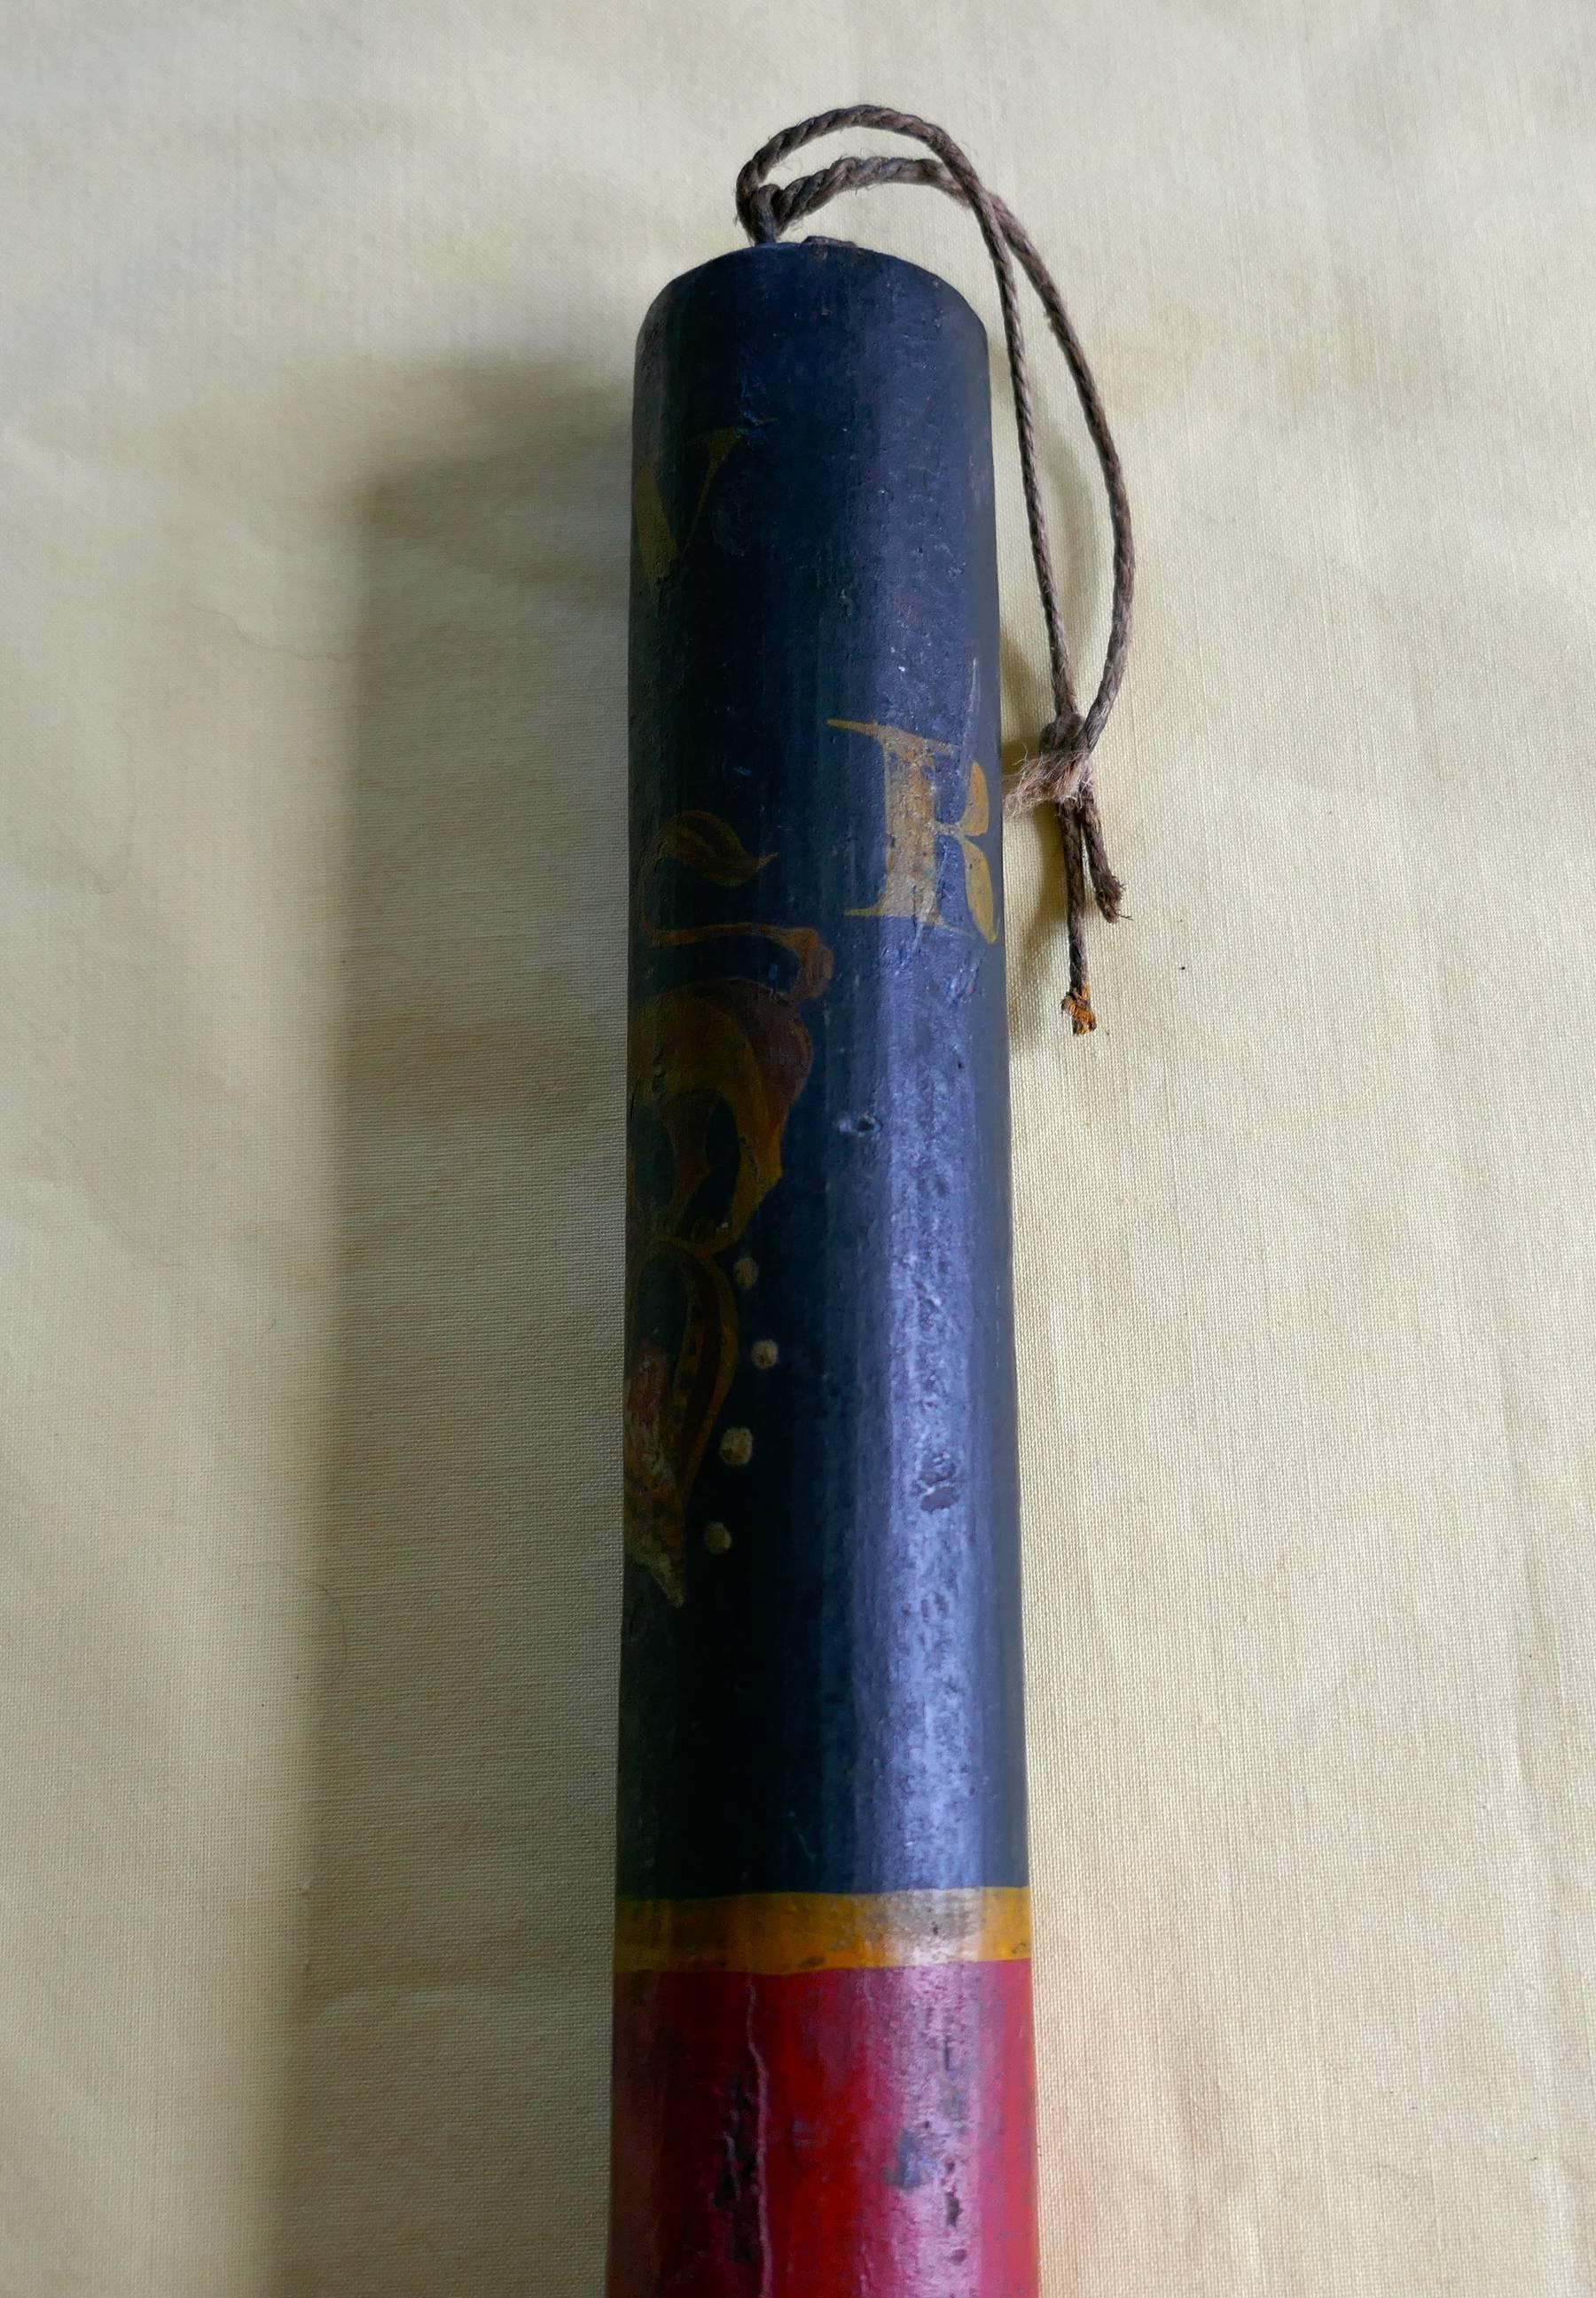 A William IV policeman’s truncheon.

A great piece of social history, the baton has a slightly shaped grip handle, the lower part is painted in Red and the upper part has a blue background with the lion crested crown cypher for WR IV.

A good